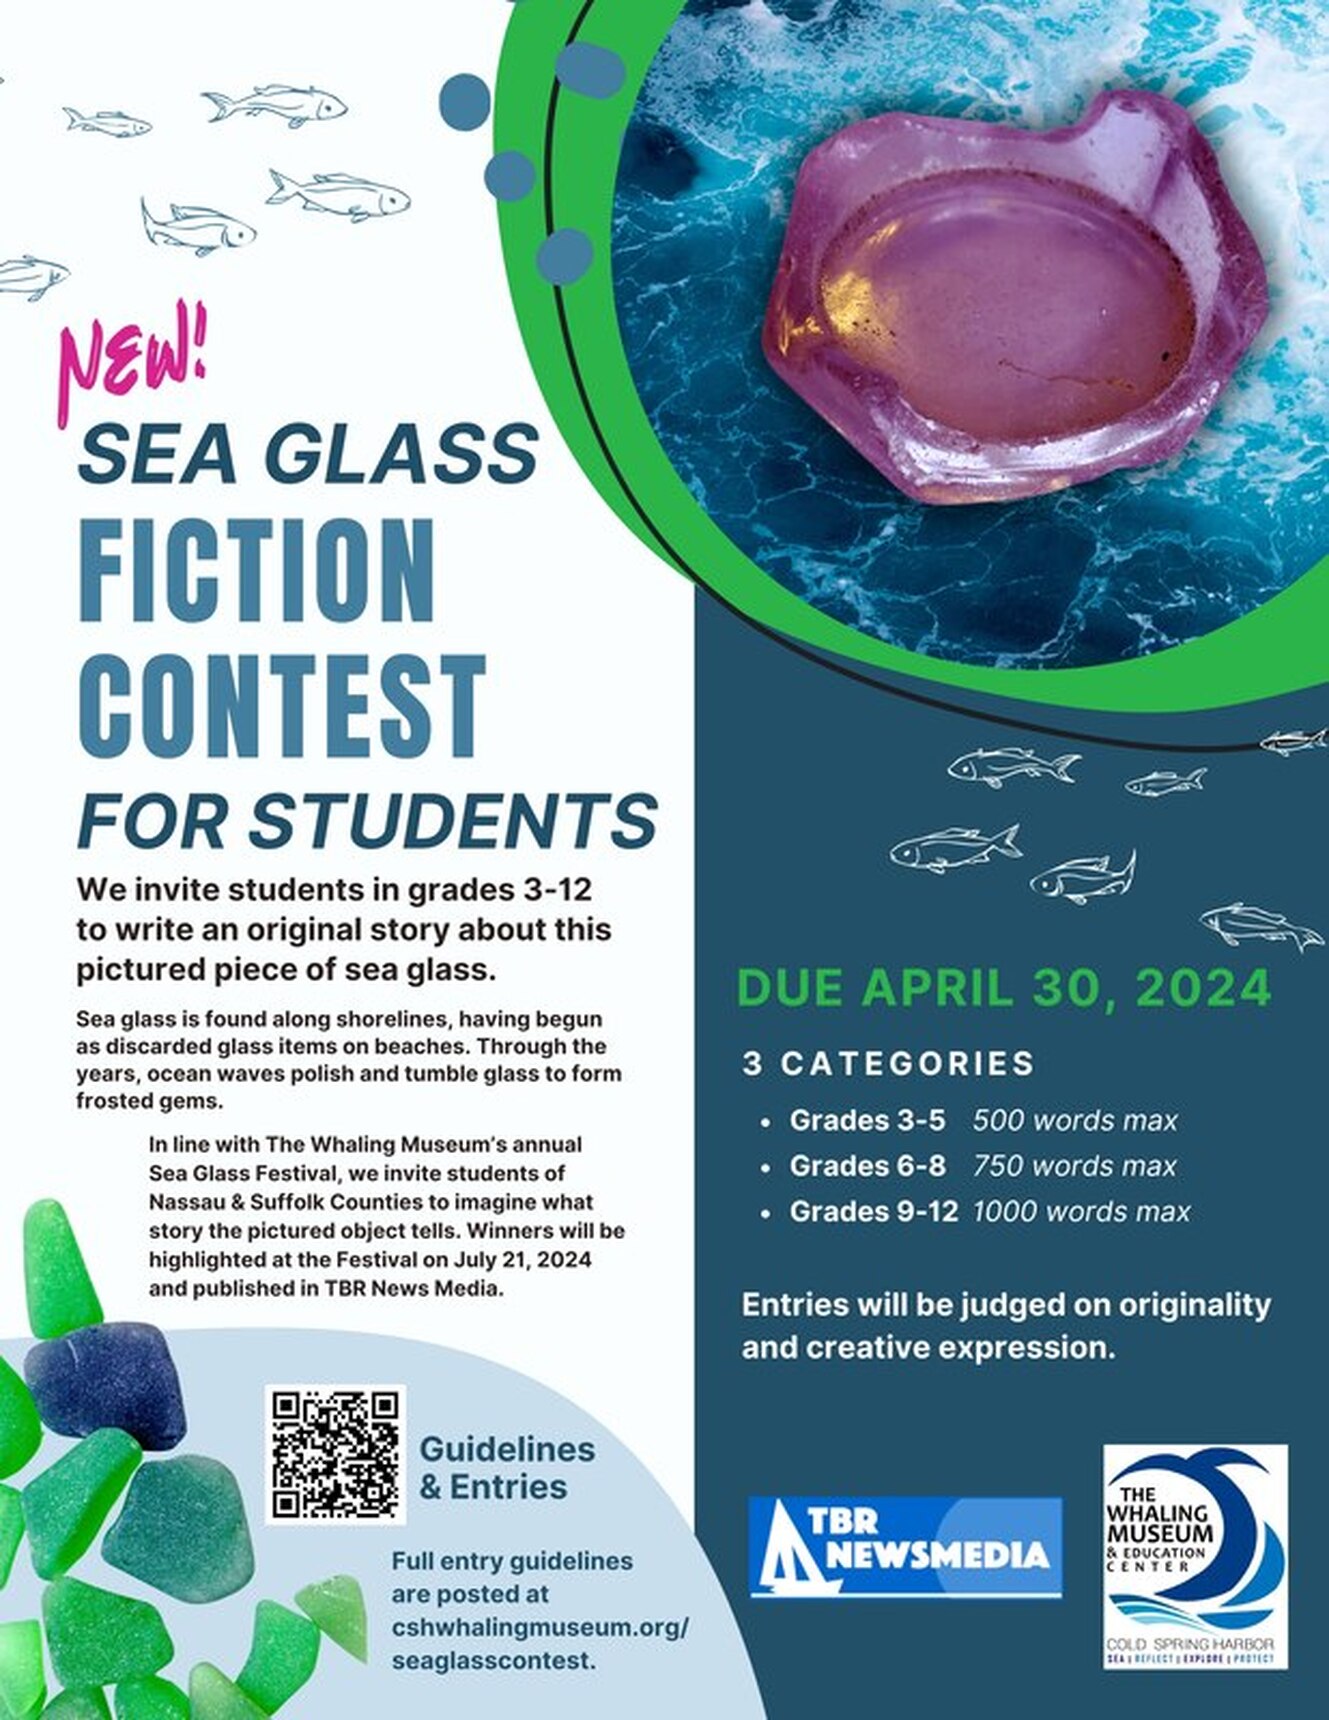 We invite students in grades 3-12 to write an original story about this pictured piece of sea glass.    Sea glass is found along shorelines, having begun as discarded glass items on beaches. Through the years, ocean waves polish and tumble glass to form frosted gems. In line with The Whaling Museum’s annual Sea Glass Festival, we invite students of Nassau & Suffolk Counties to imagine what story the pictured object tells. Winners will be highlighted at the Festival on July 21, 2024 and published in TBR News Media. There are three categories - Grades 3-5 (500 words max), Grades 6-8 (750 words max), and Grades 9-12 ( 1000 words max). Entries are judged on originality and creative expression. Due April 30, 2024.